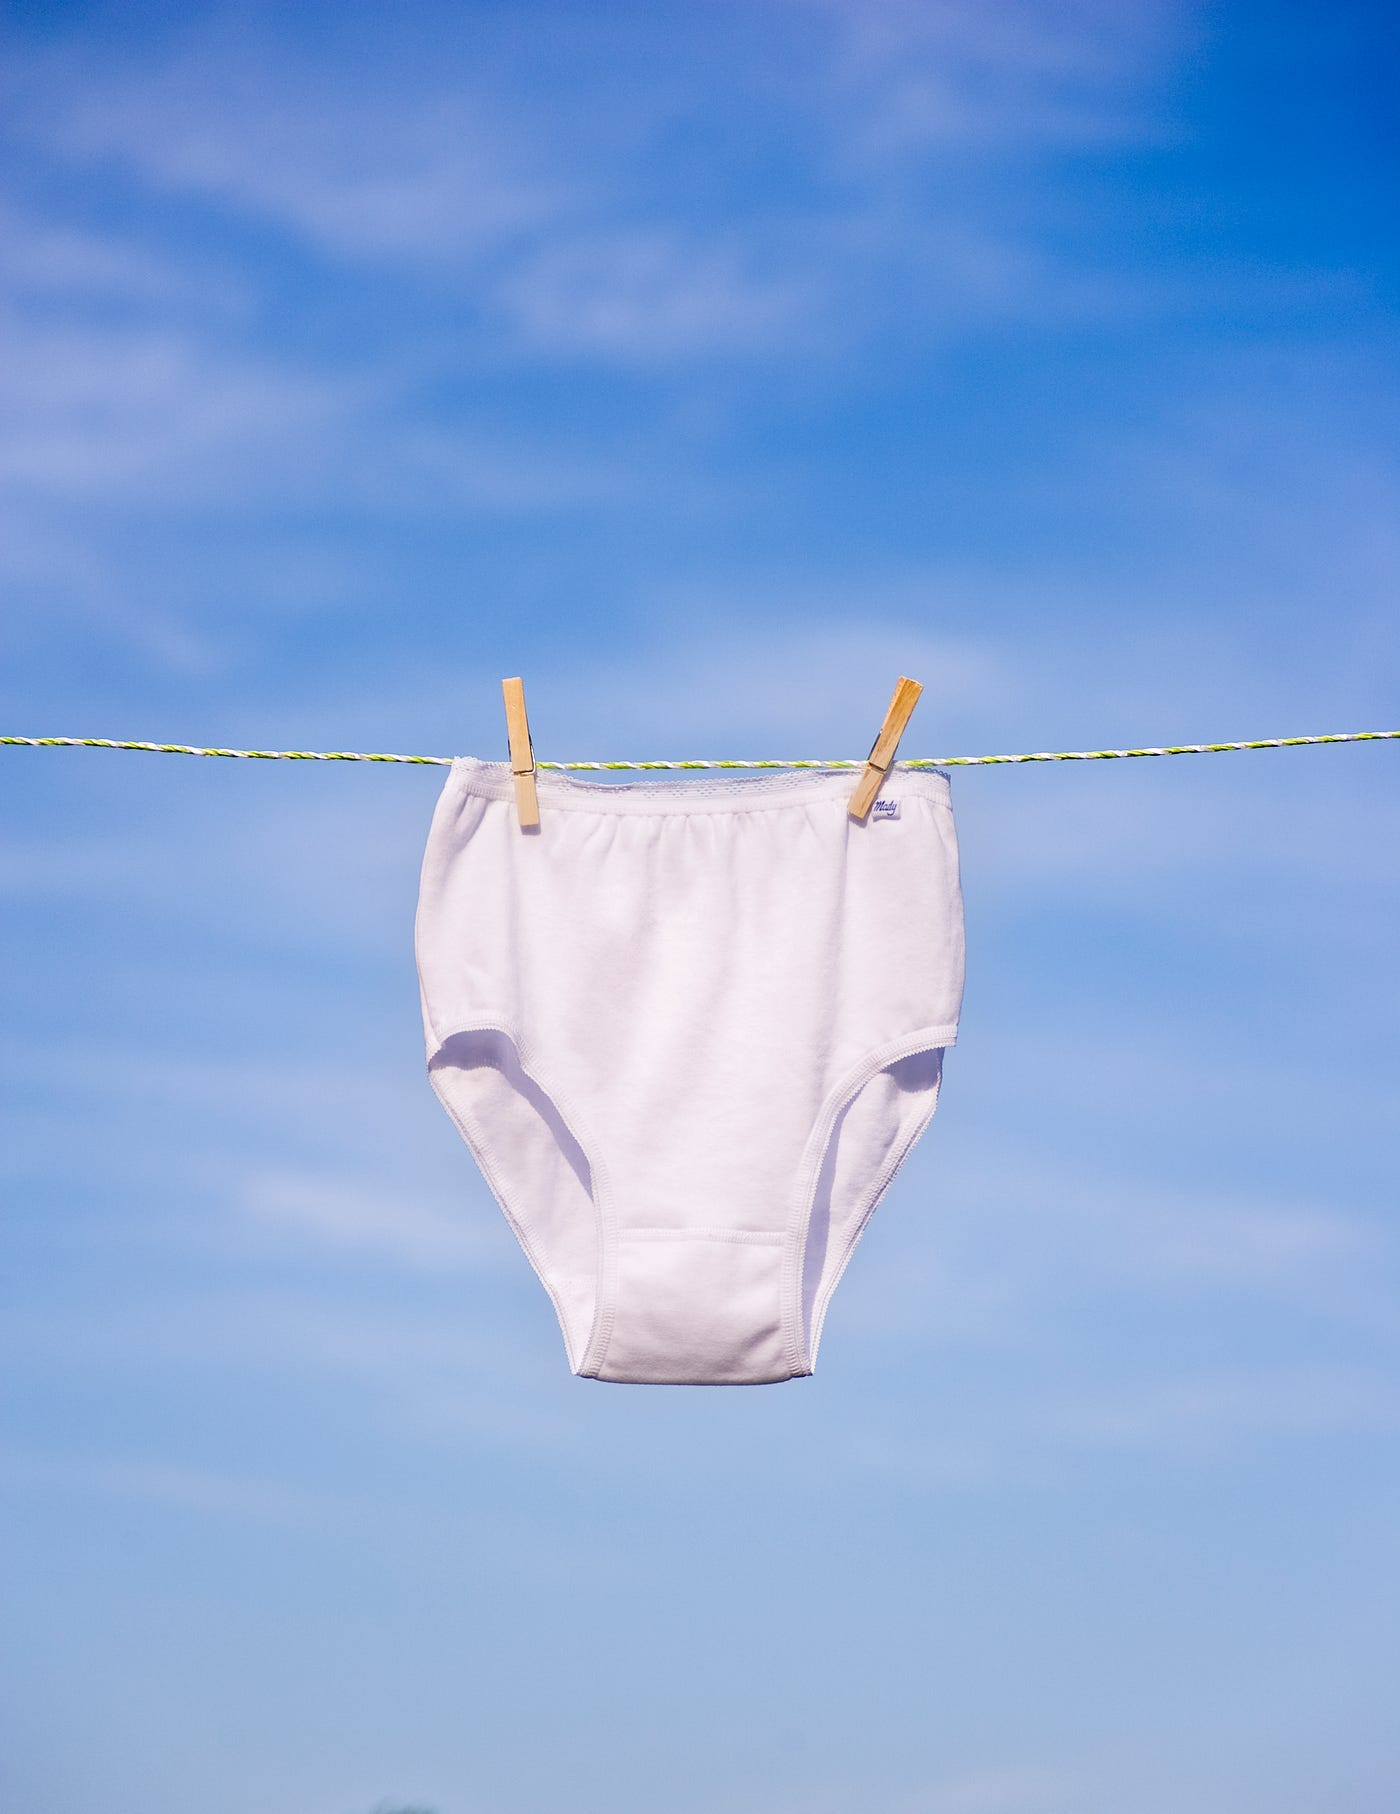 3 Surprising Things You Need To Know About Wearing Big Knickers, by Caryn  Leach-Smith